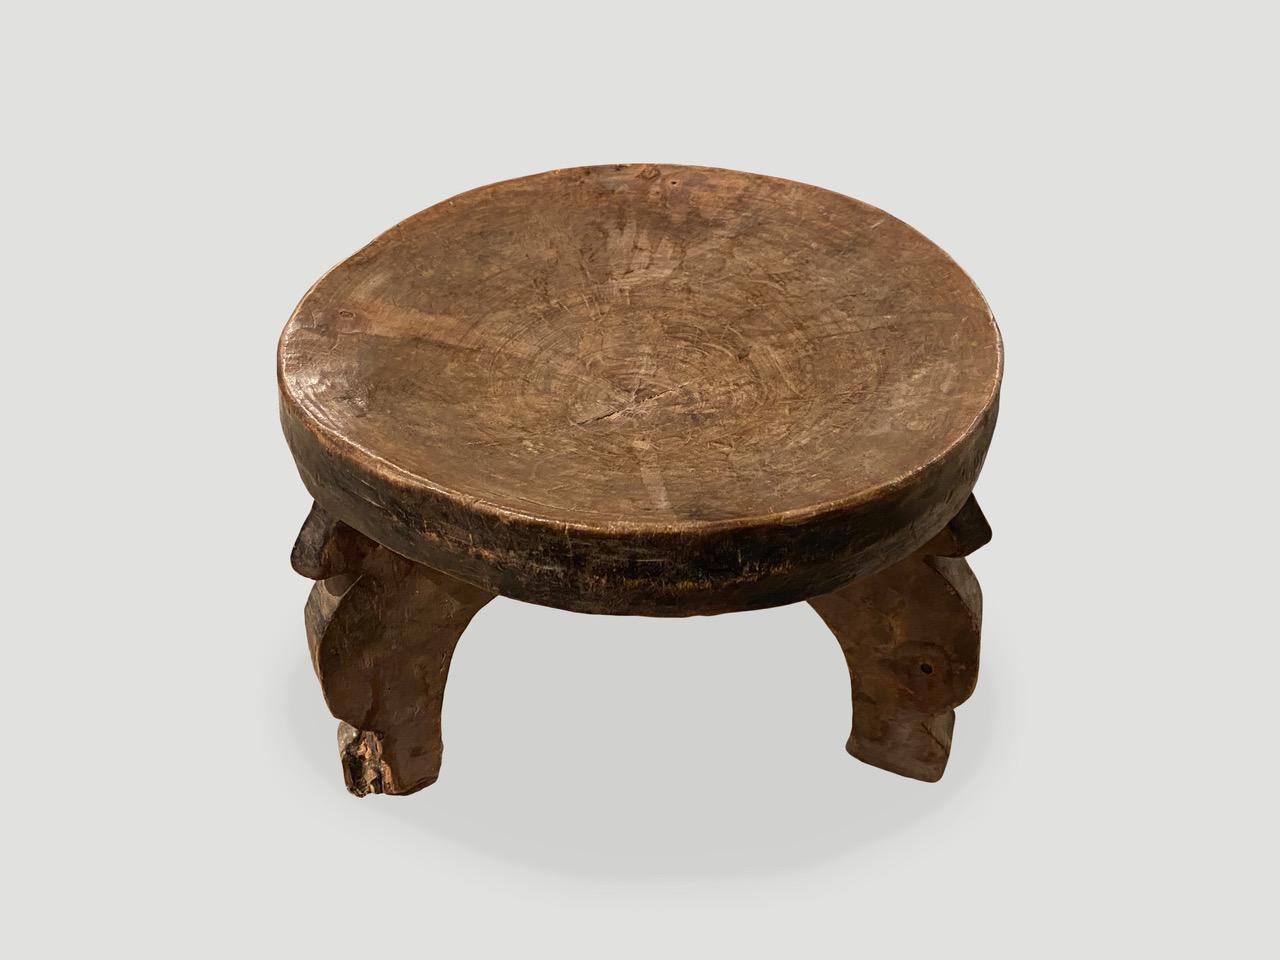 Andrianna Shamaris Antique African Tray Side Table or Bowl In Excellent Condition For Sale In New York, NY